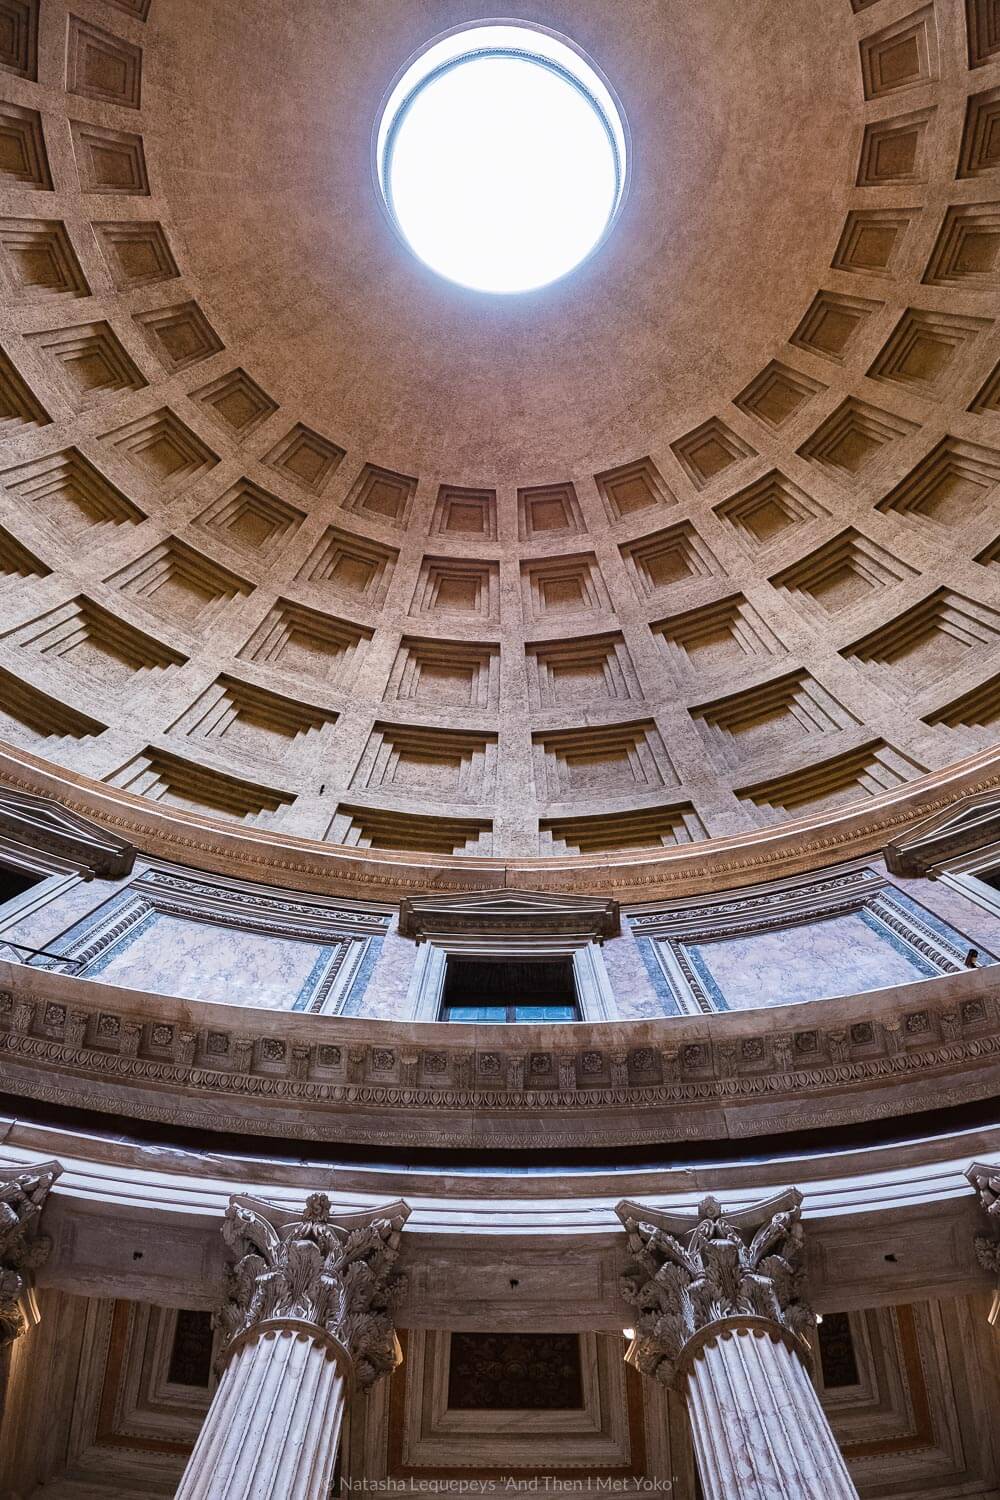 The dome ceiling in the Pantheon in Rome, Italy. Travel photography and guide by © Natasha Lequepeys for "And Then I Met Yoko". #rome #italy #travelblog #travelphotography